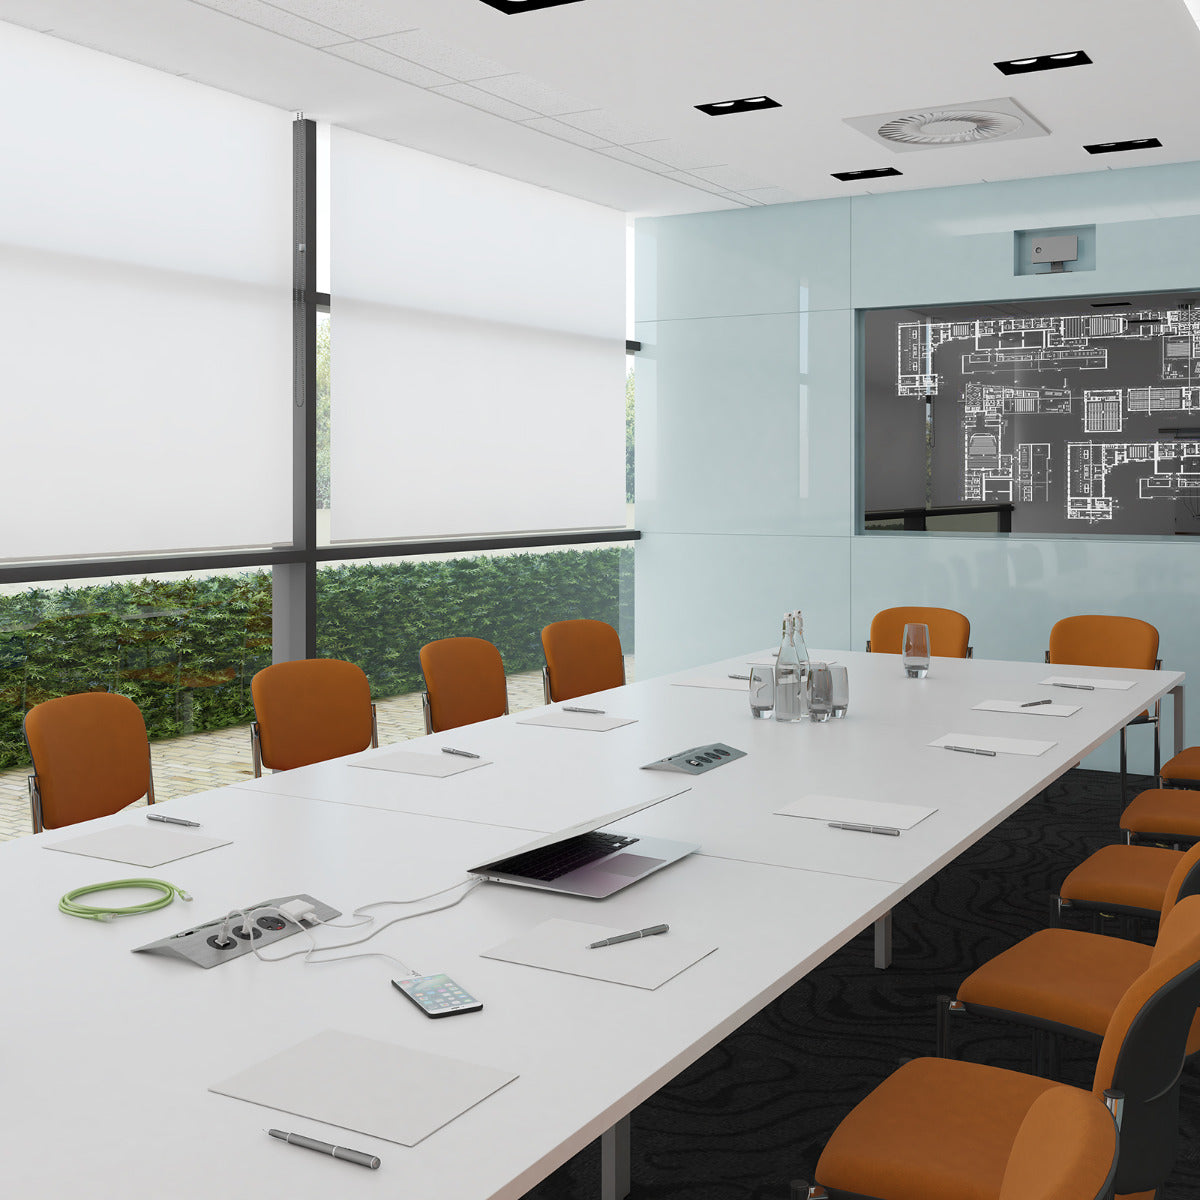 Adapt Modular Boardroom Table - Multiple Sizes and Configurations